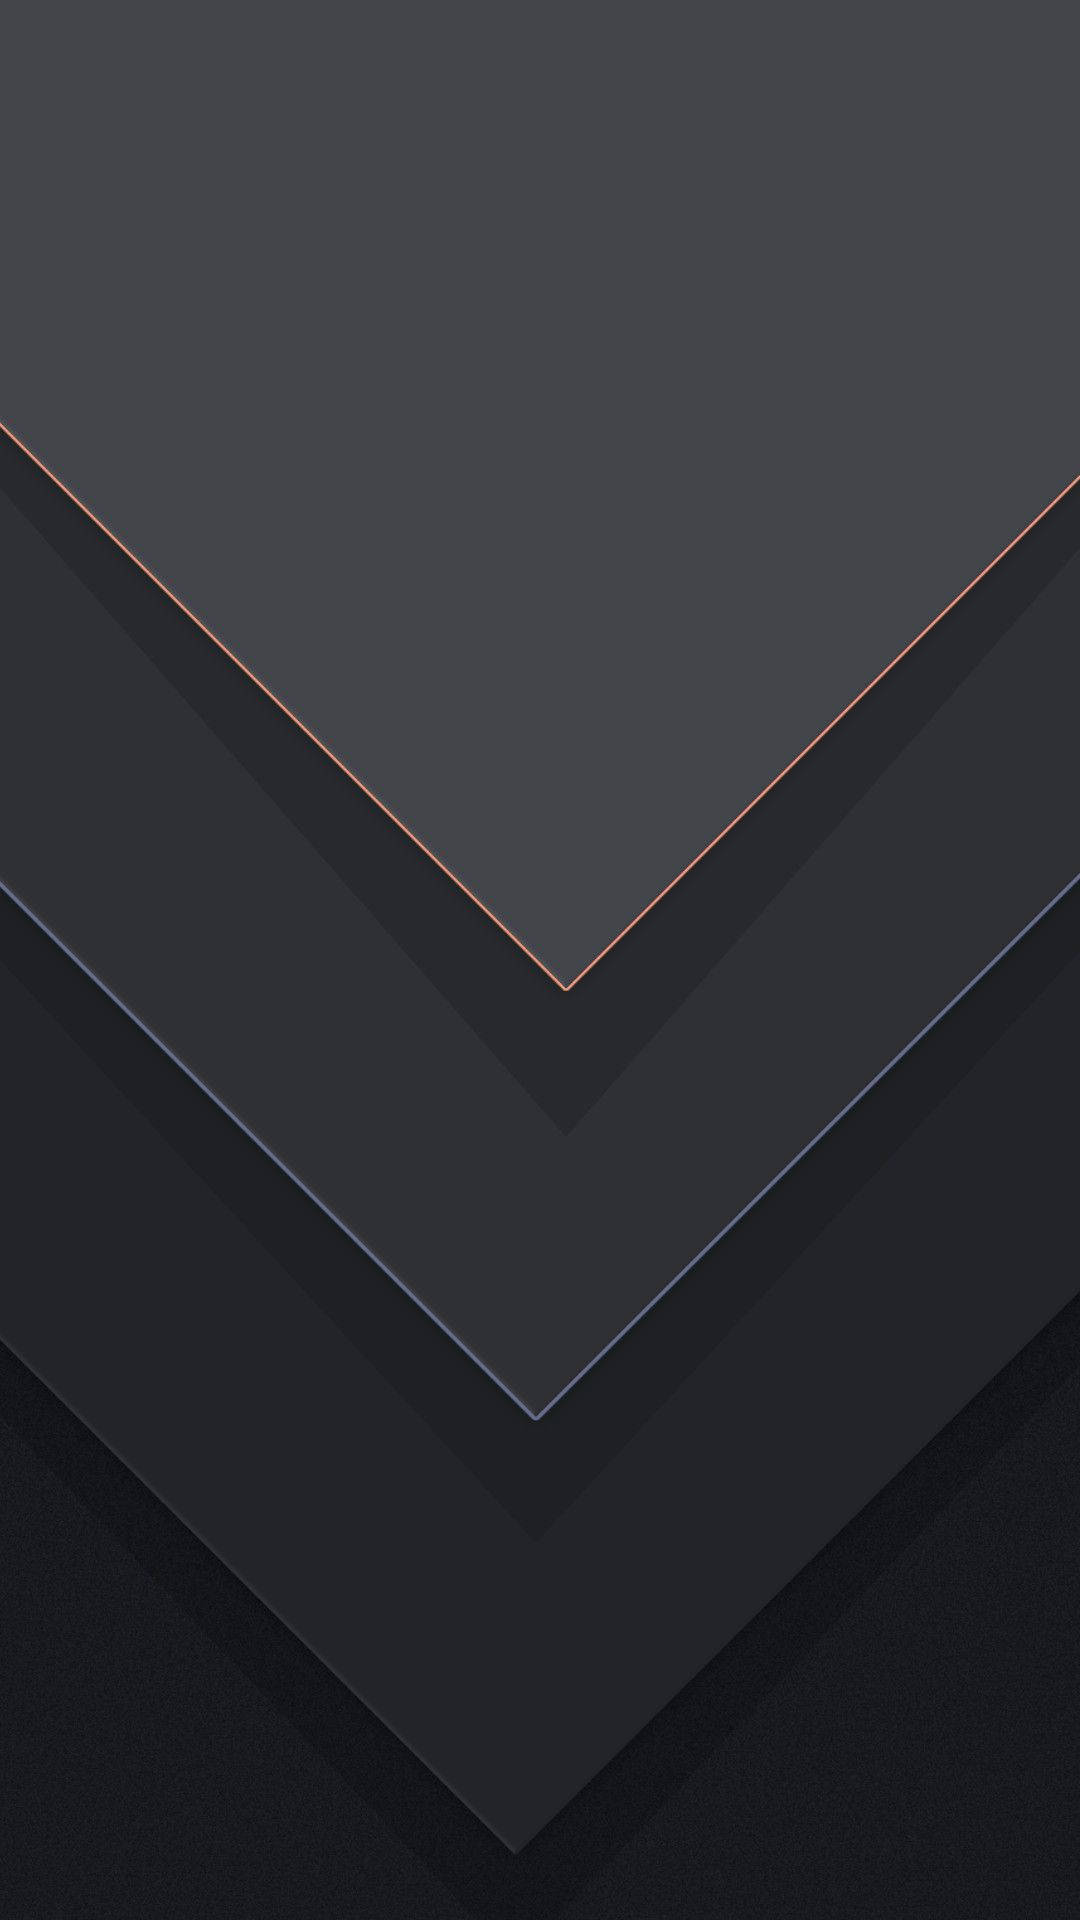 Black Android Inverted Triangles